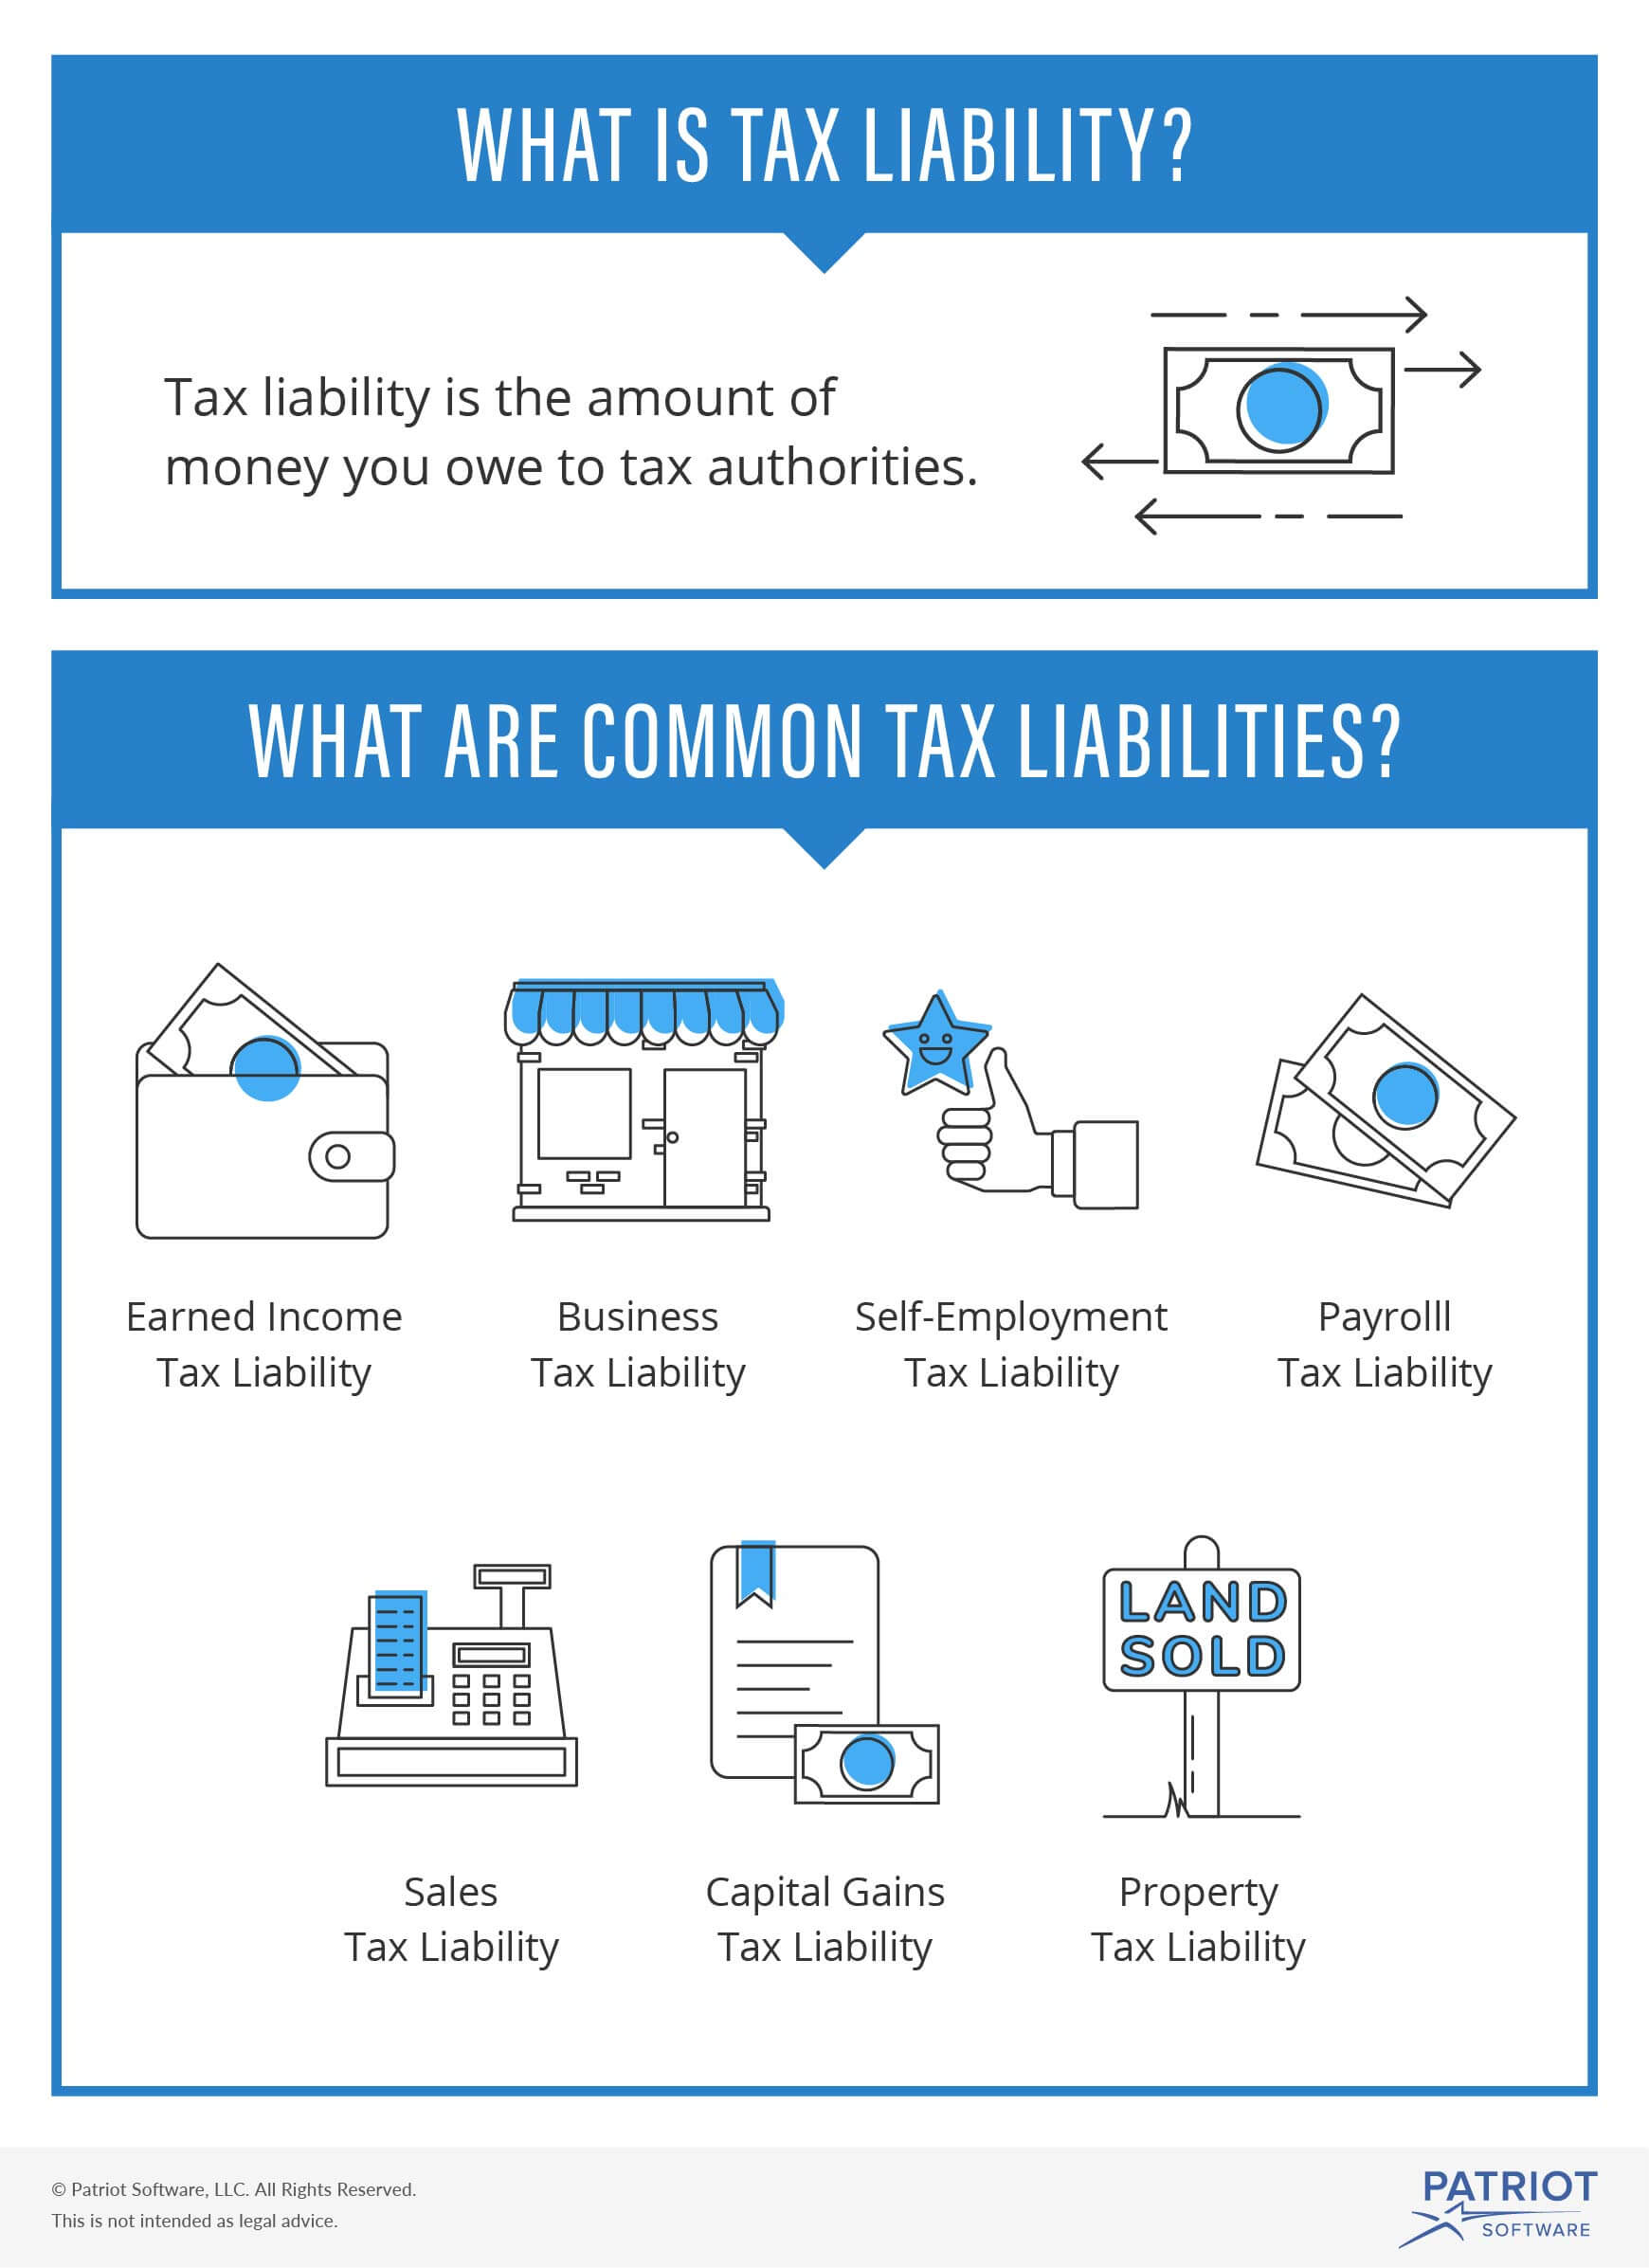 What Is Tax Liability? | Definition, Examples, & More - Patriot Software